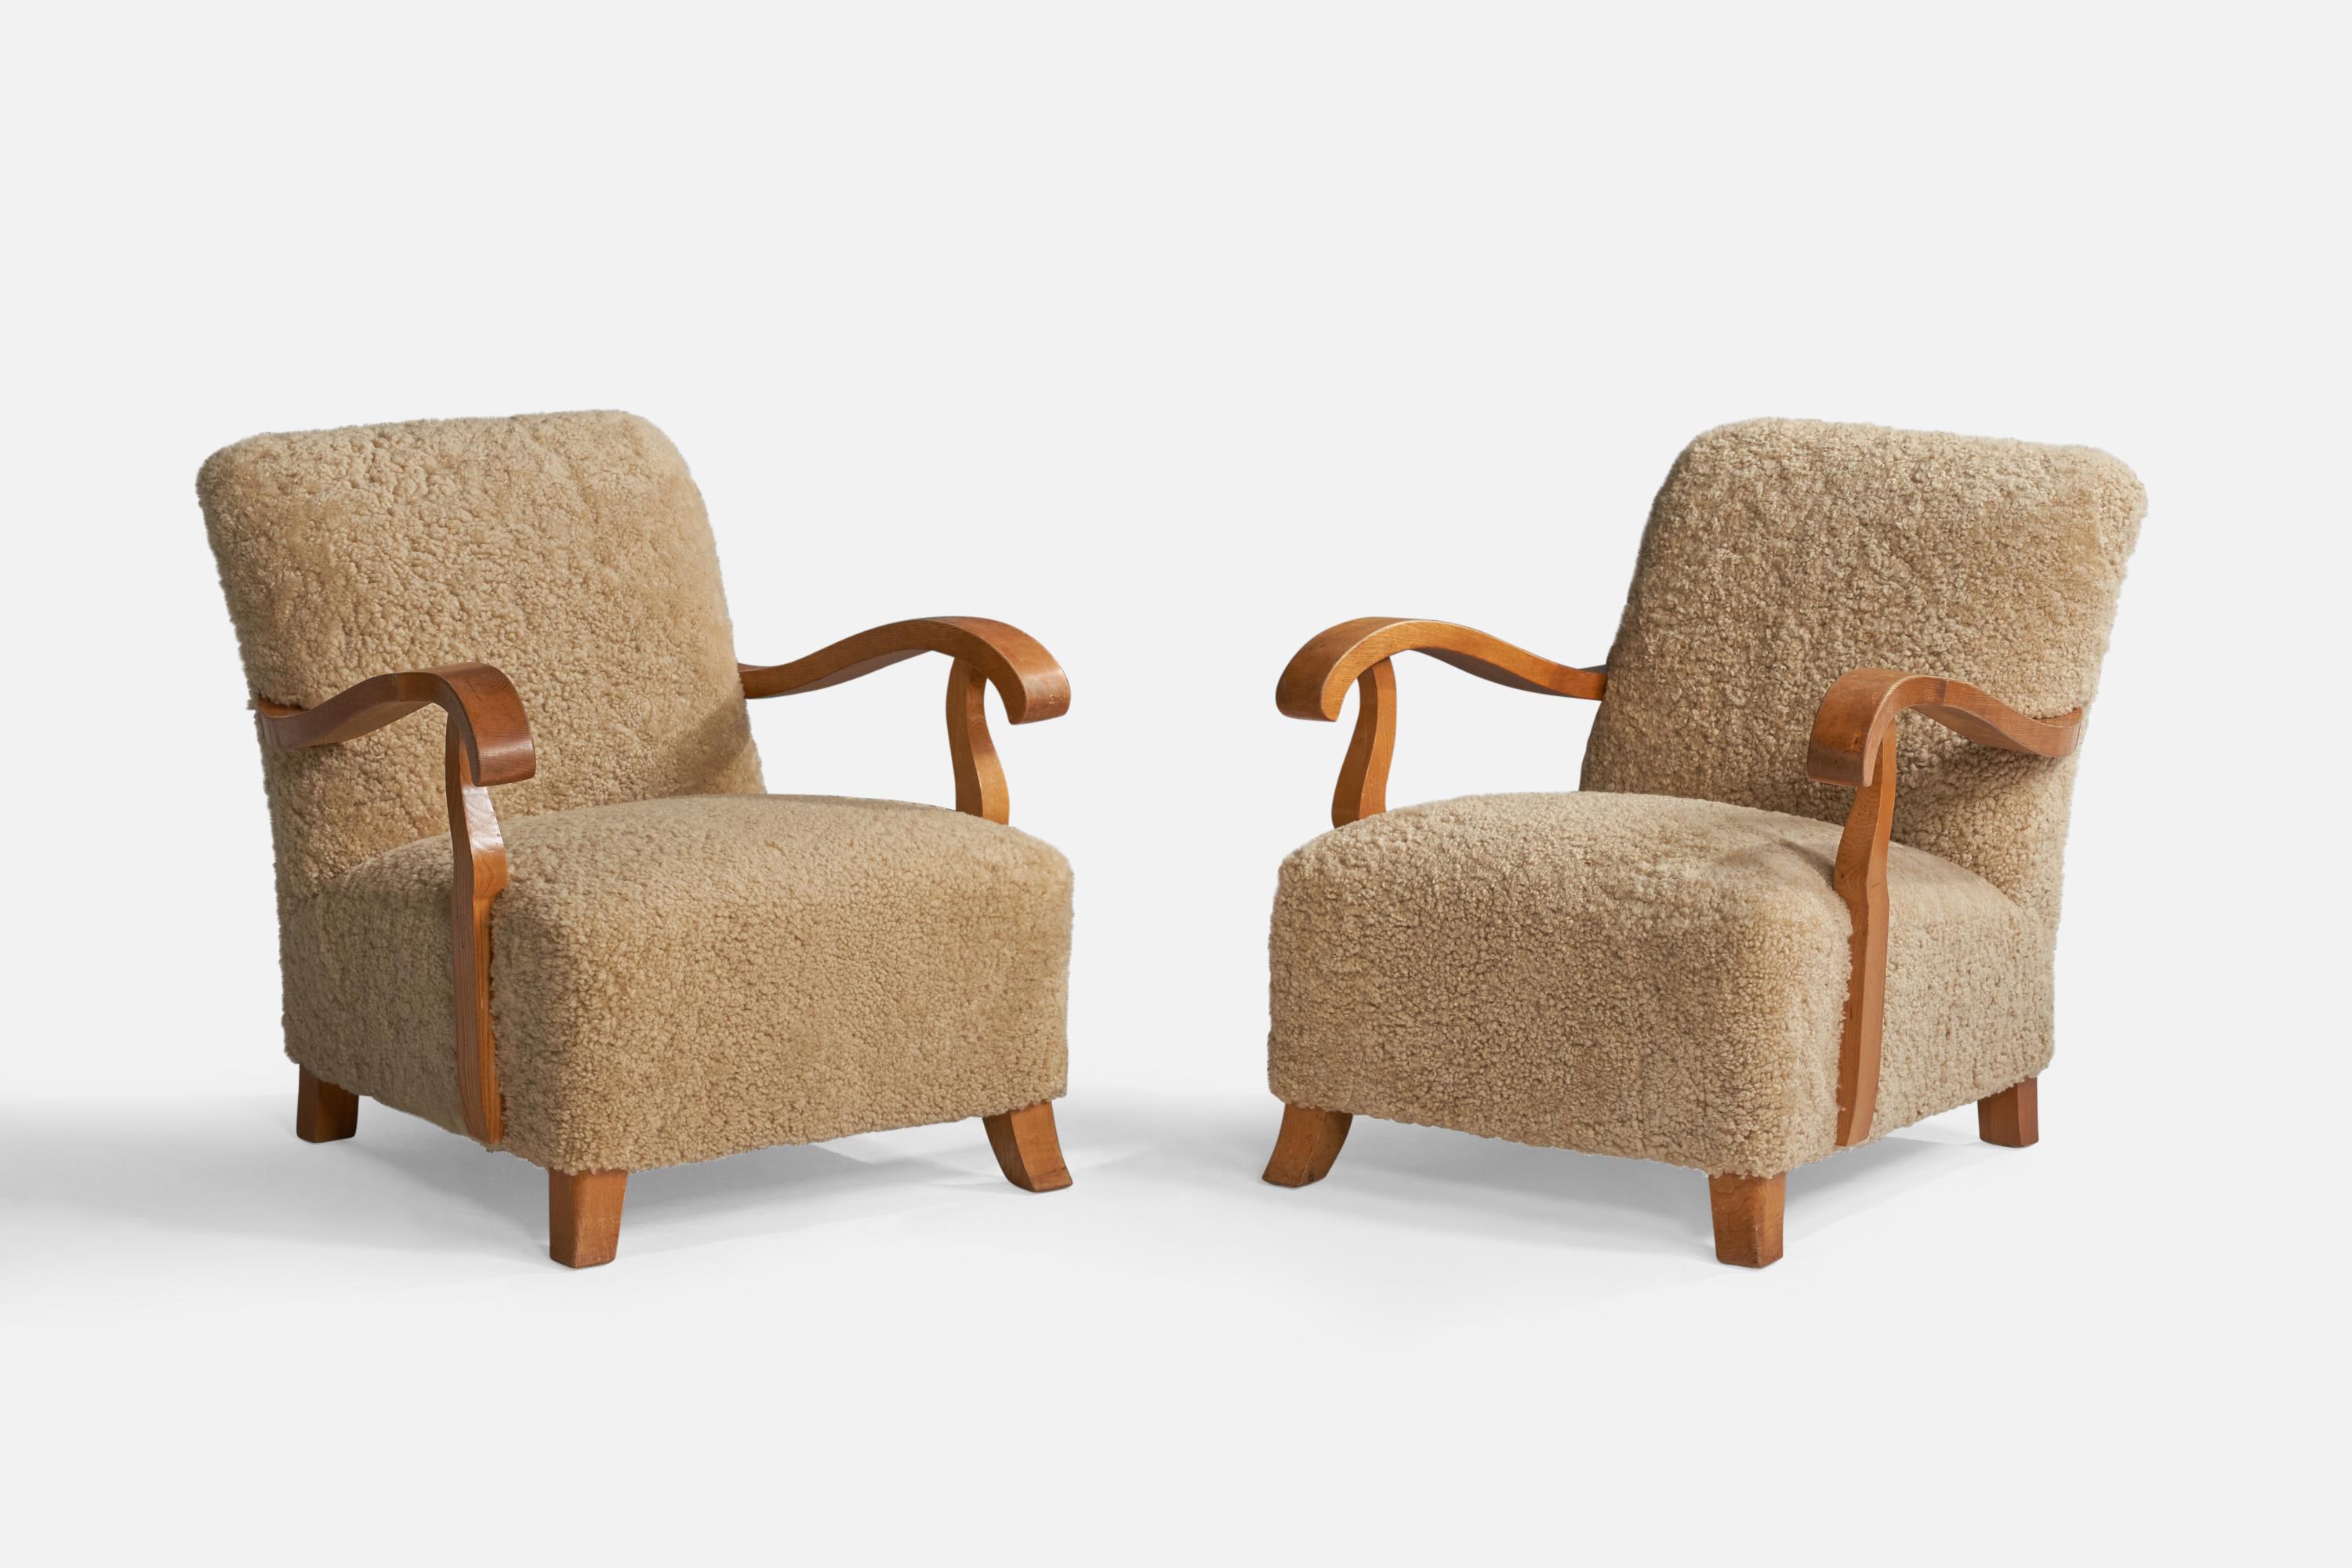 A pair of beige shearling and oak lounge chairs designed and produced in Sweden, c. 1940s.